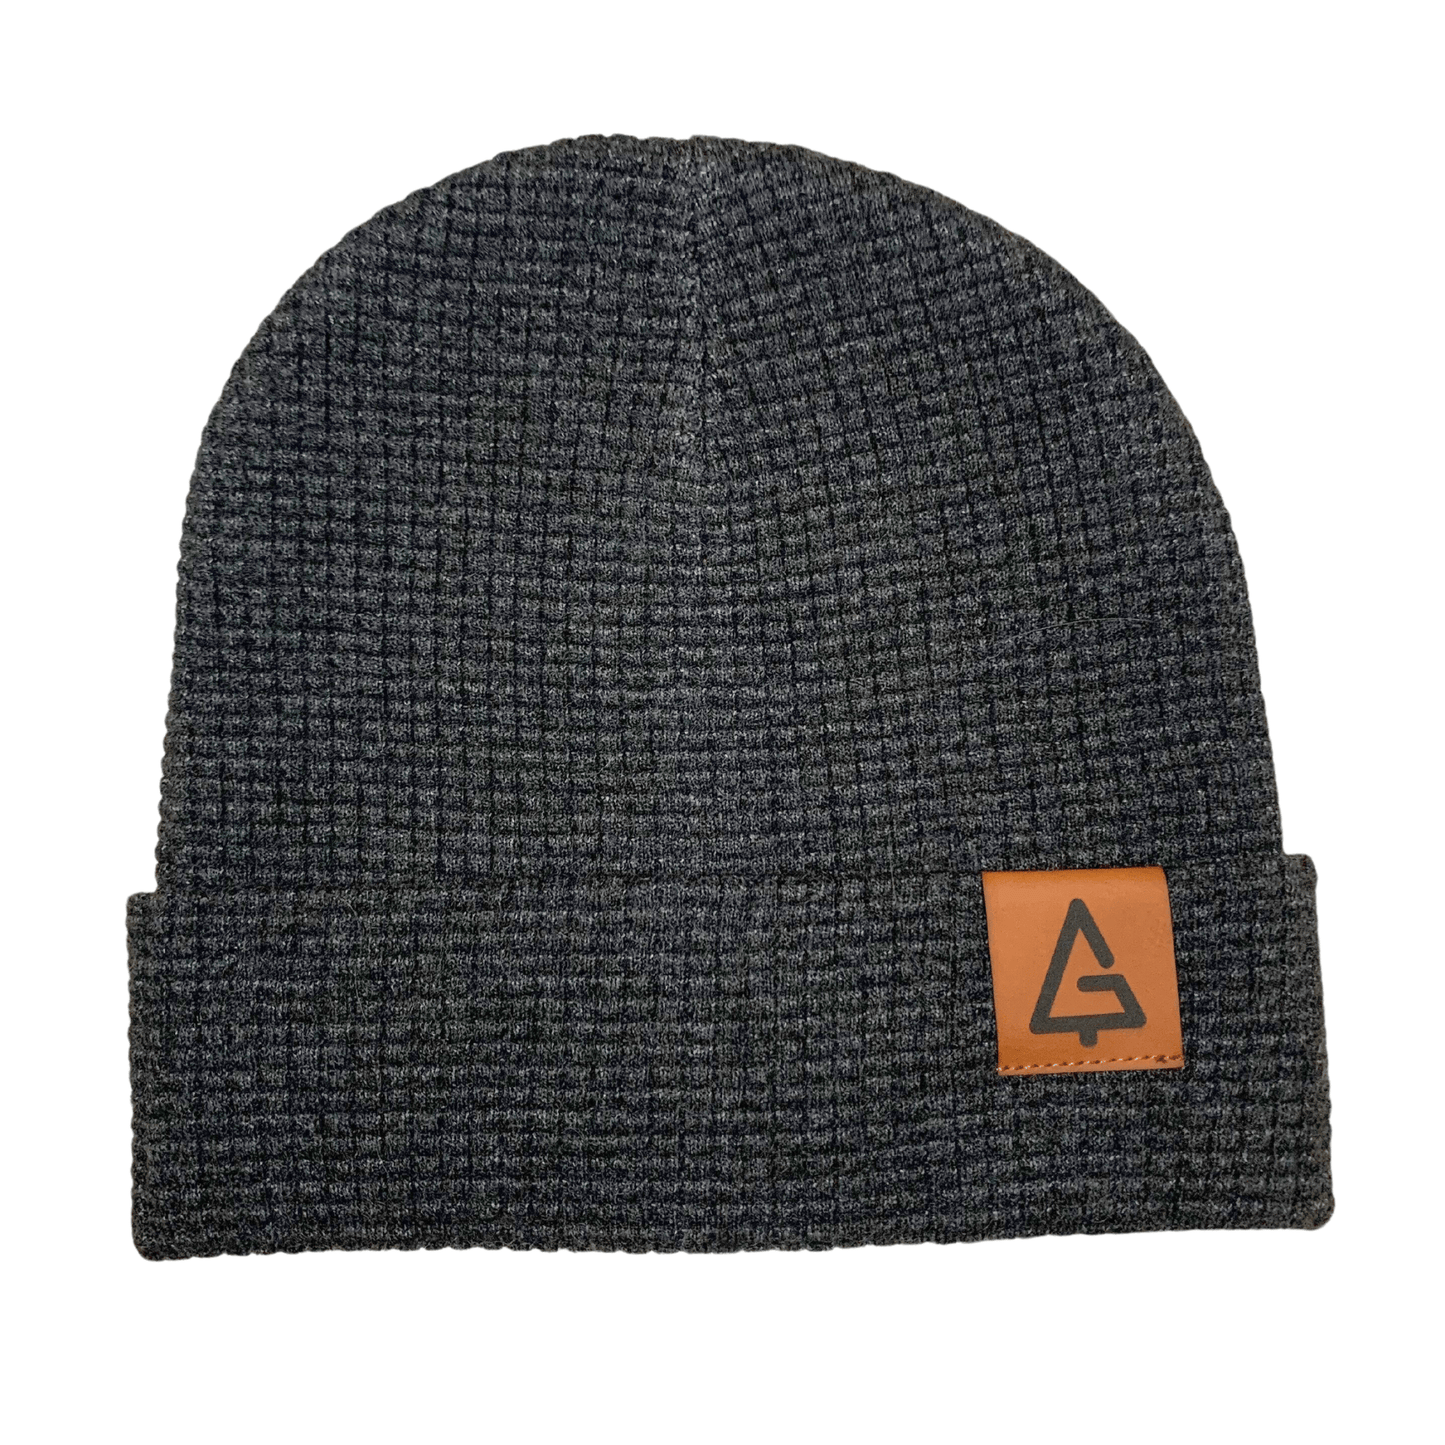 "G" Tree Waffle Toque - Go Way Out